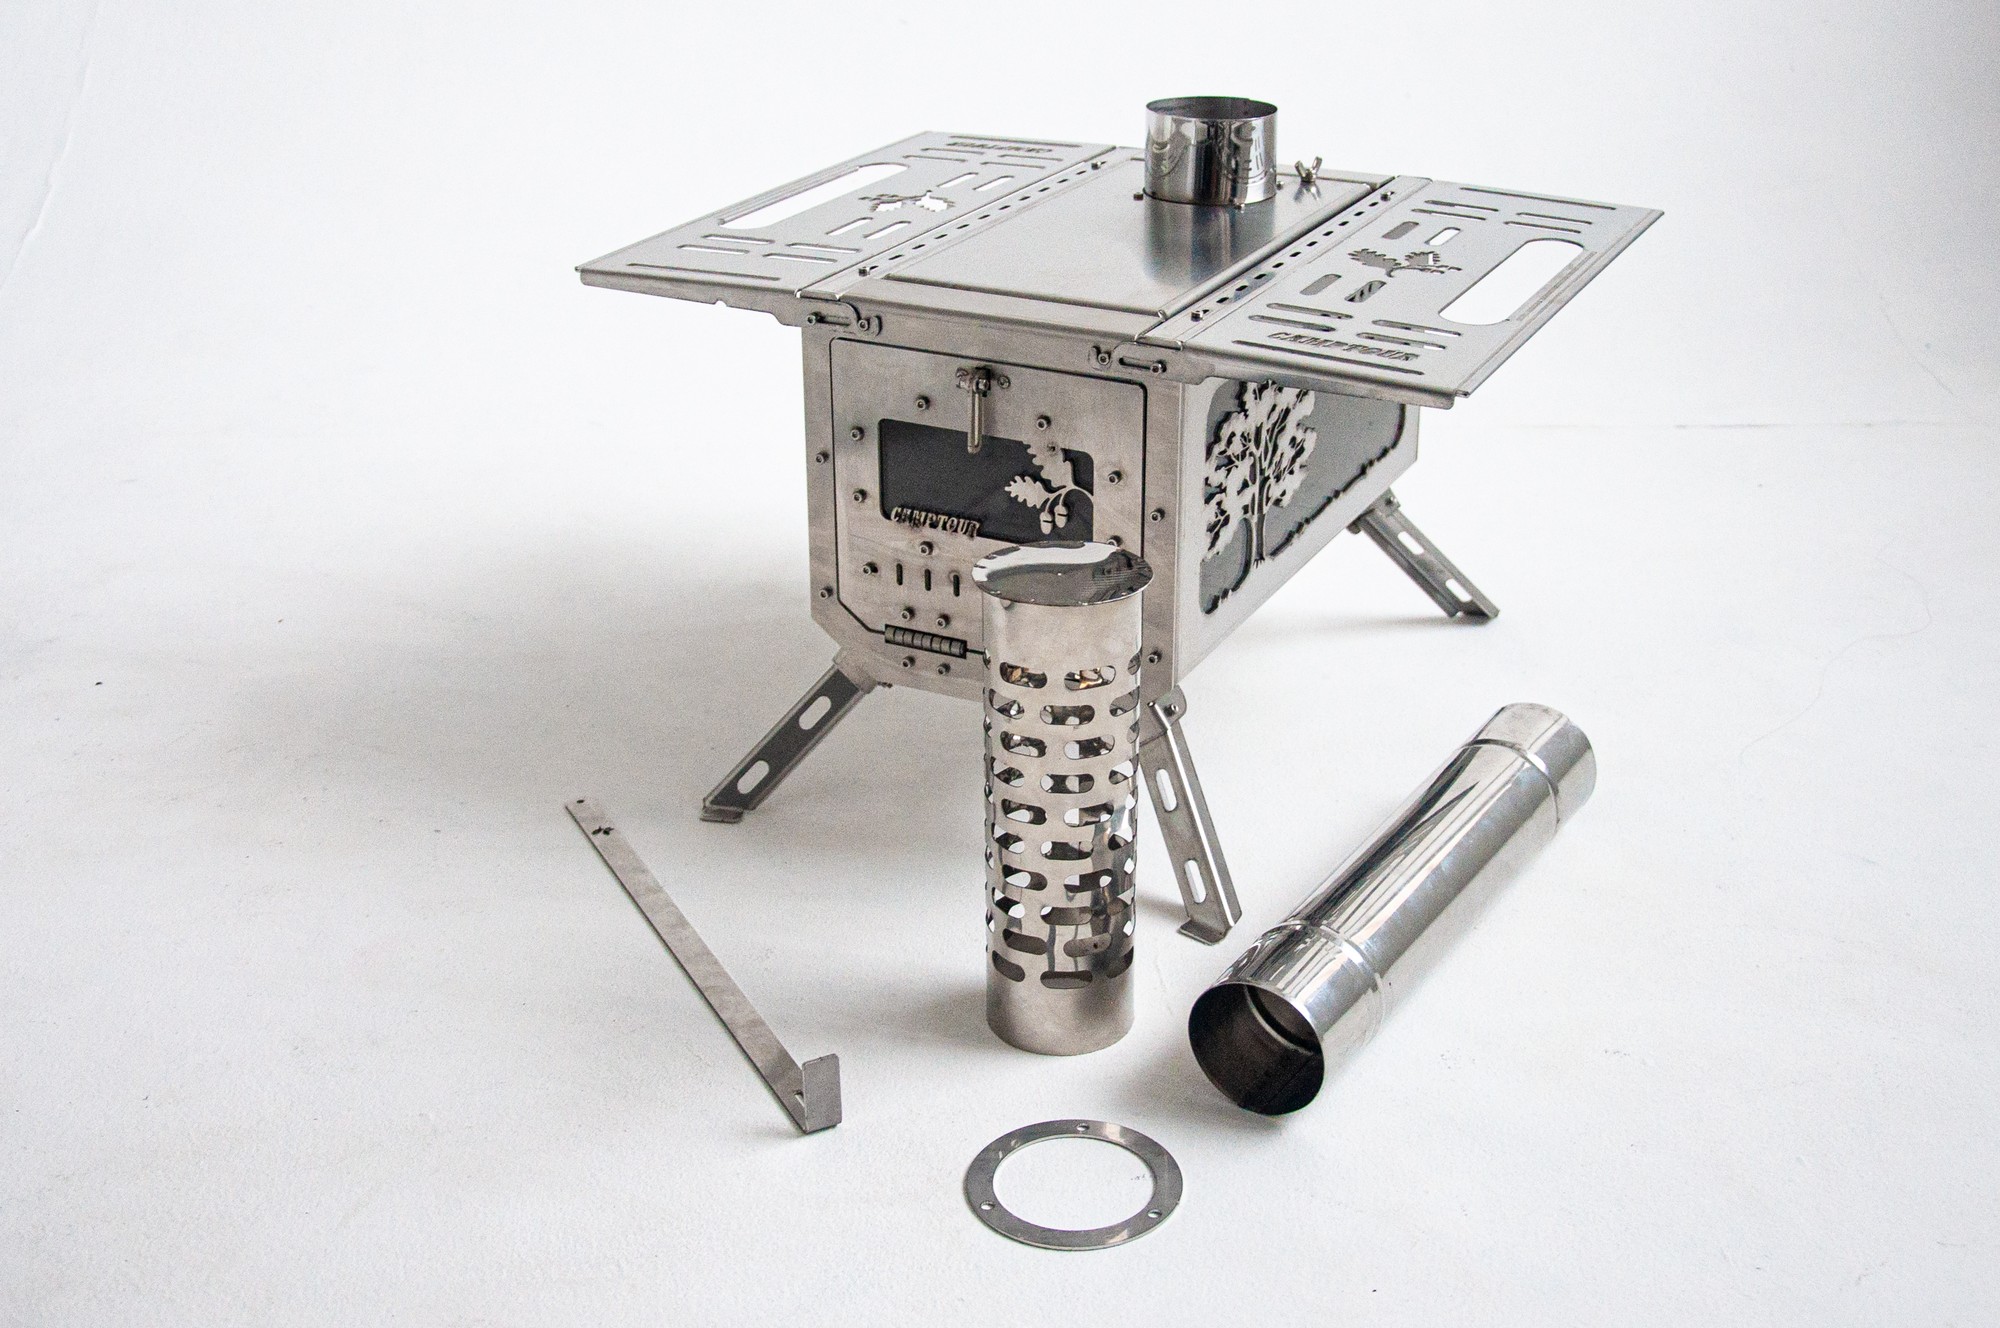 Stove with side glass! Stove for a tent, tourist. Mini portable stove for camping.